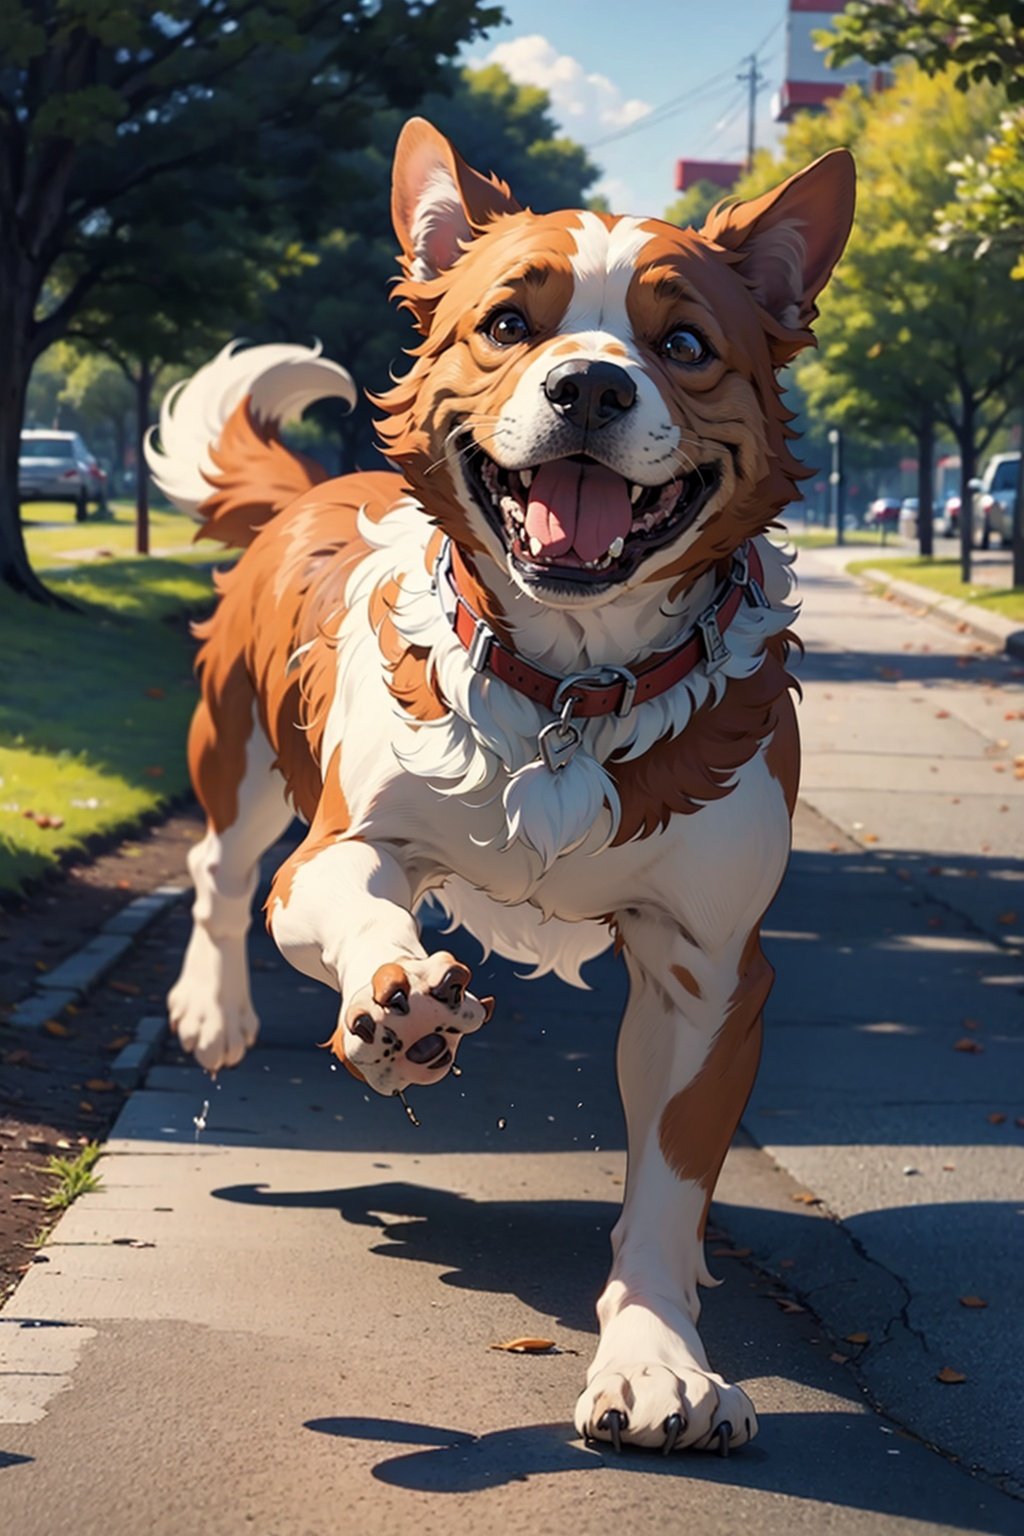 an happy dog running in a park, tongue out,